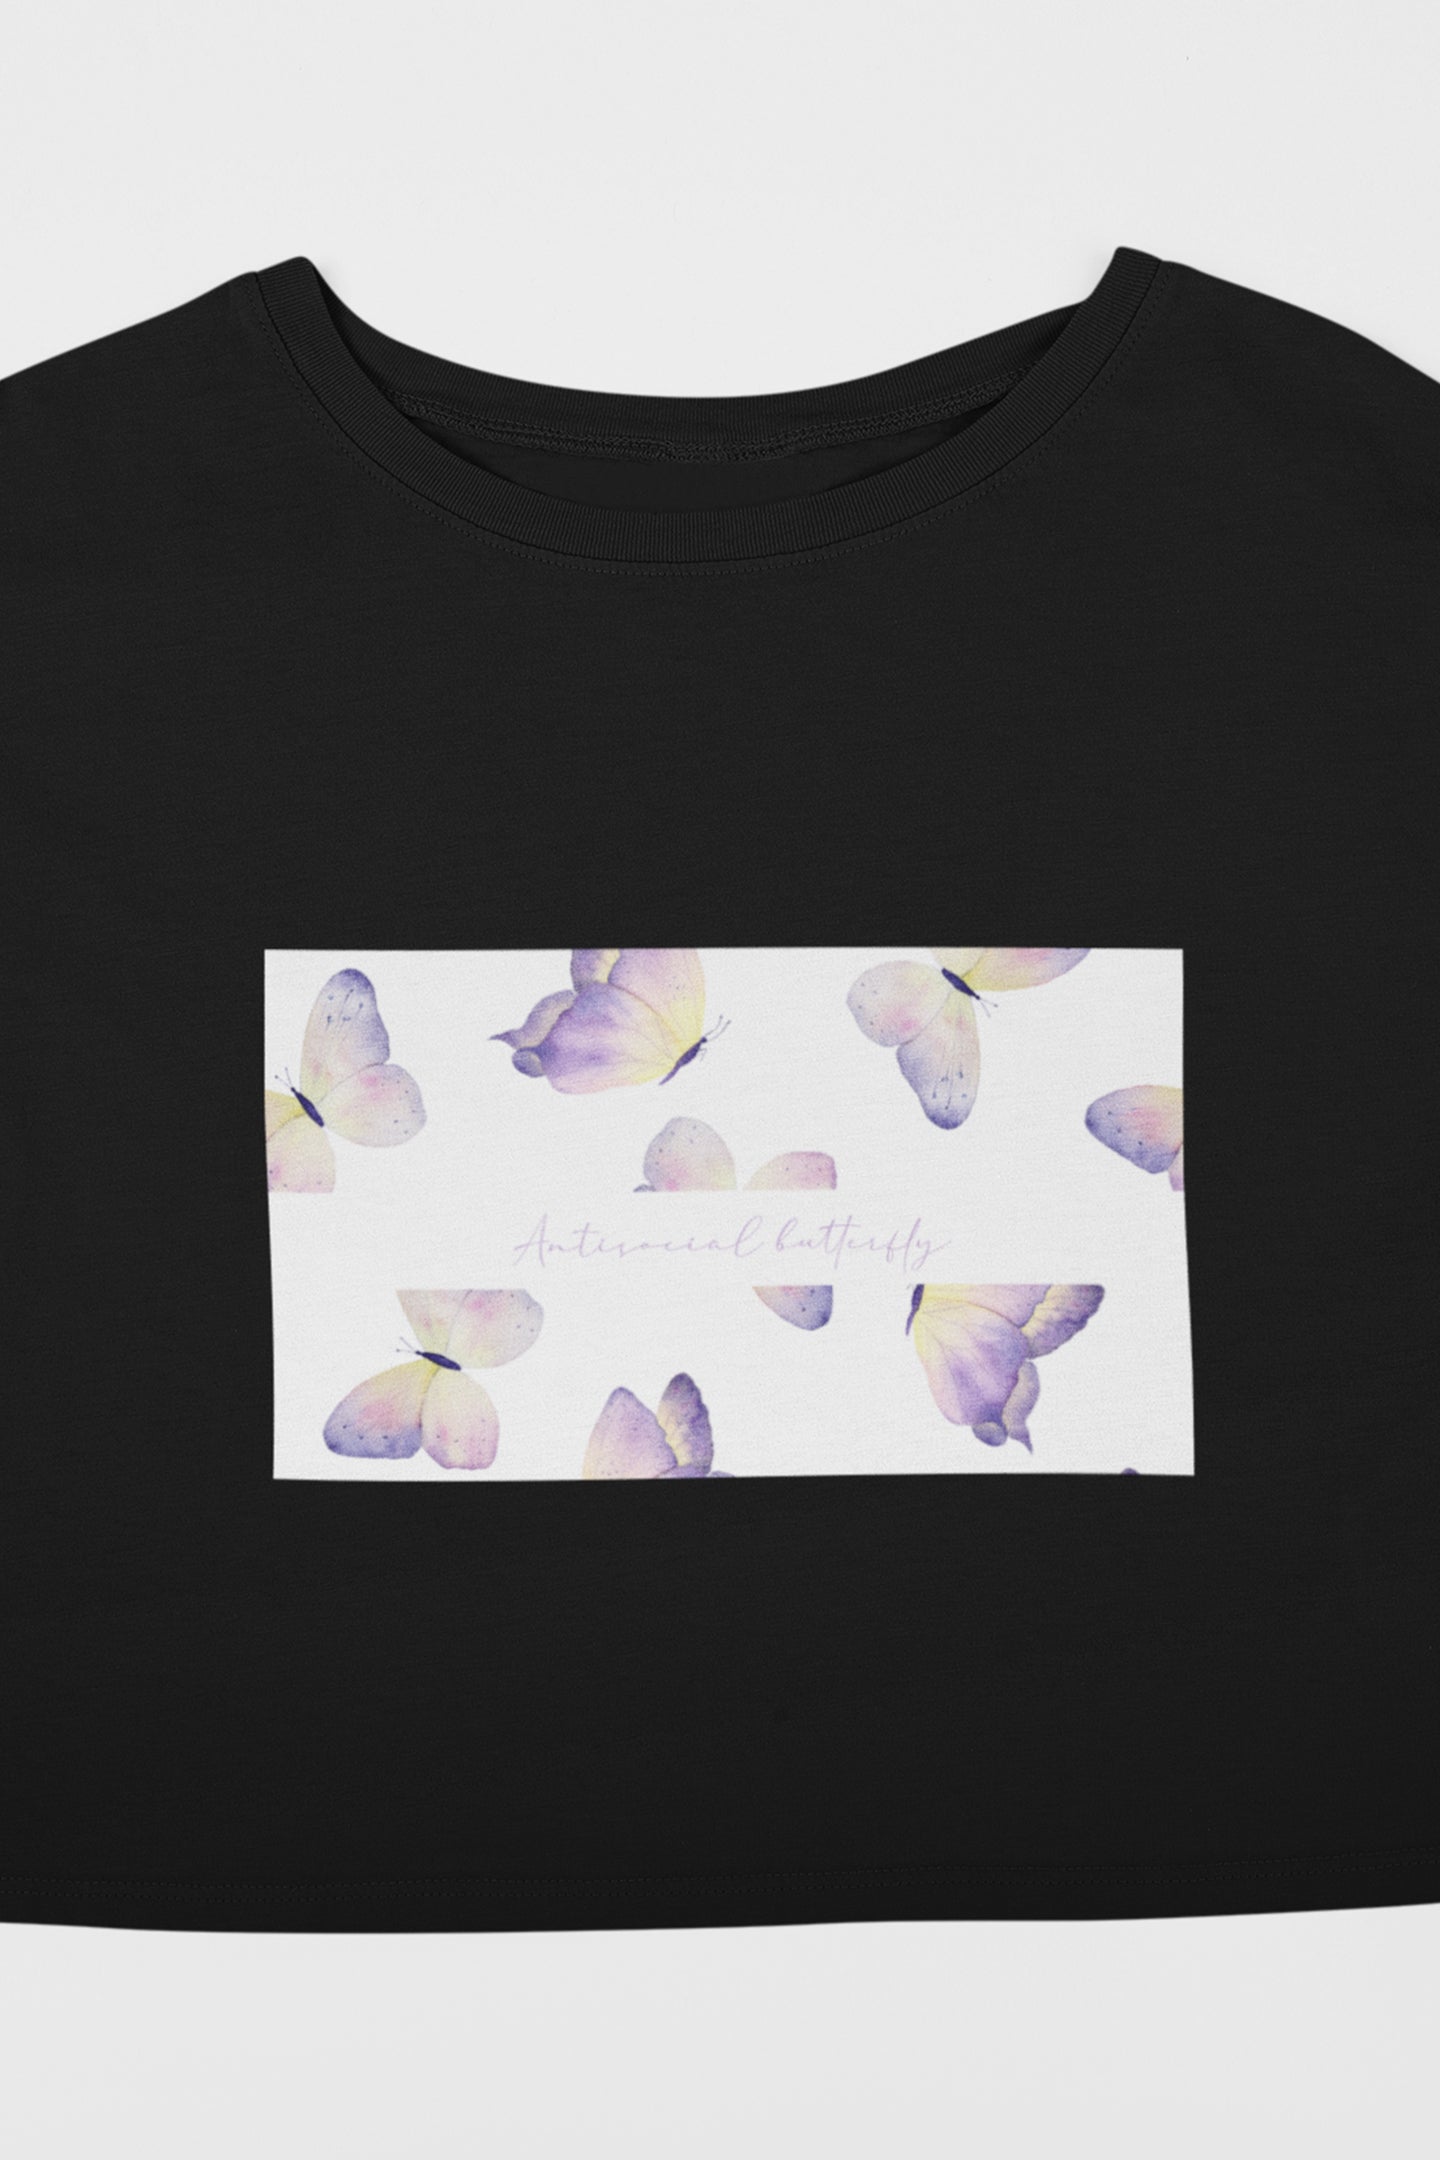 Antisocial Butterfly Organic Cotton Crop Top - keos.life